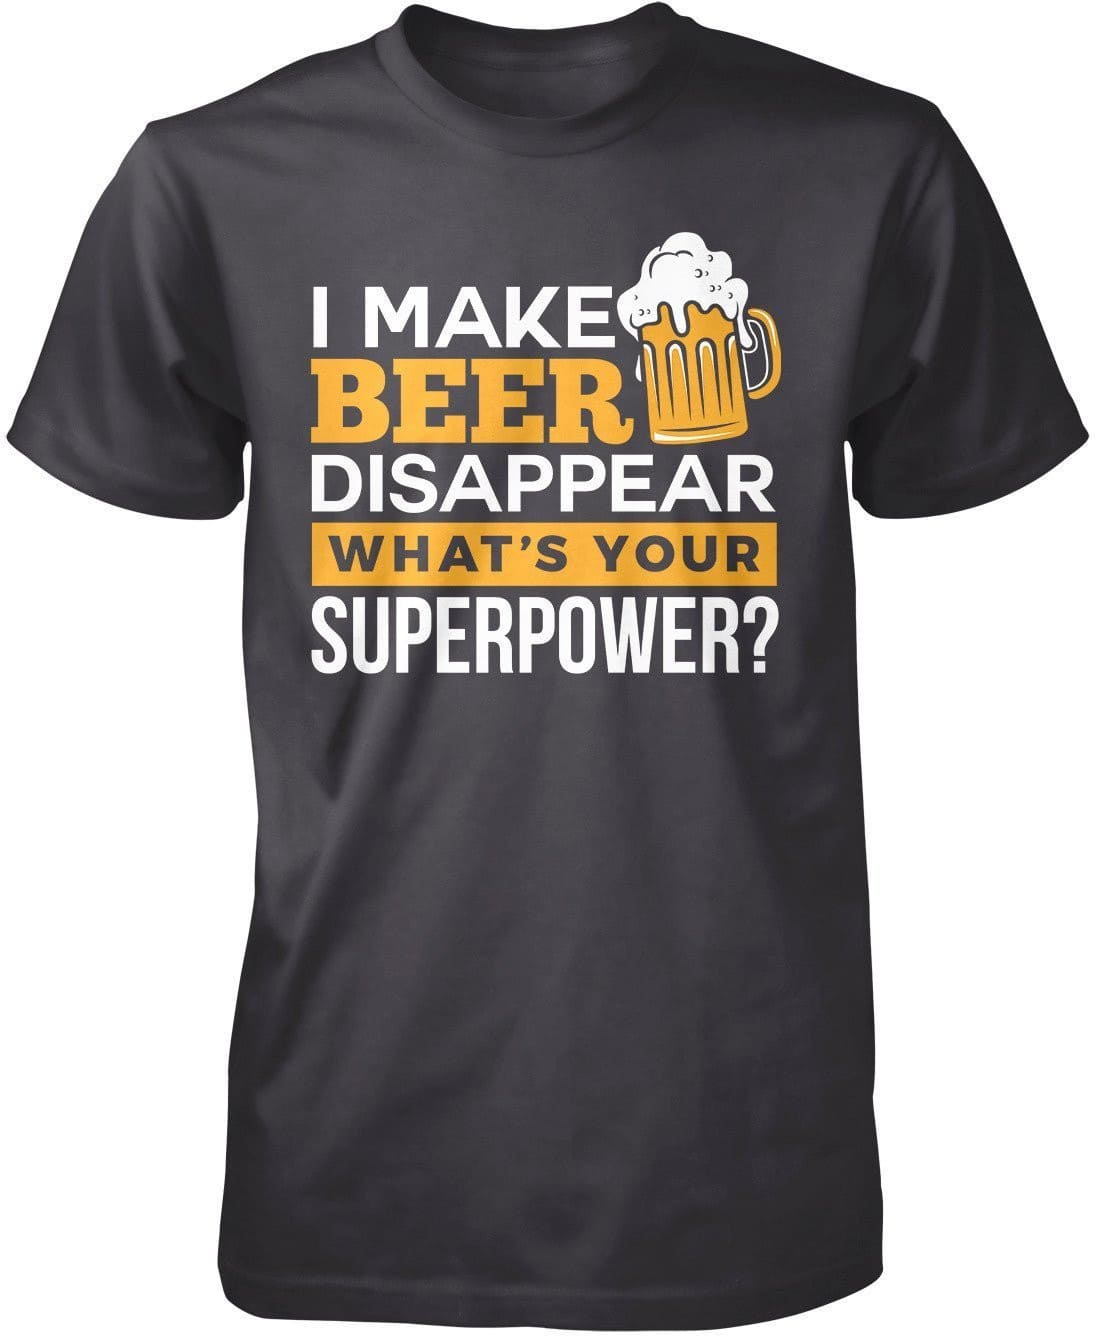 I Make Beer Disappear Superpower T-Shirt